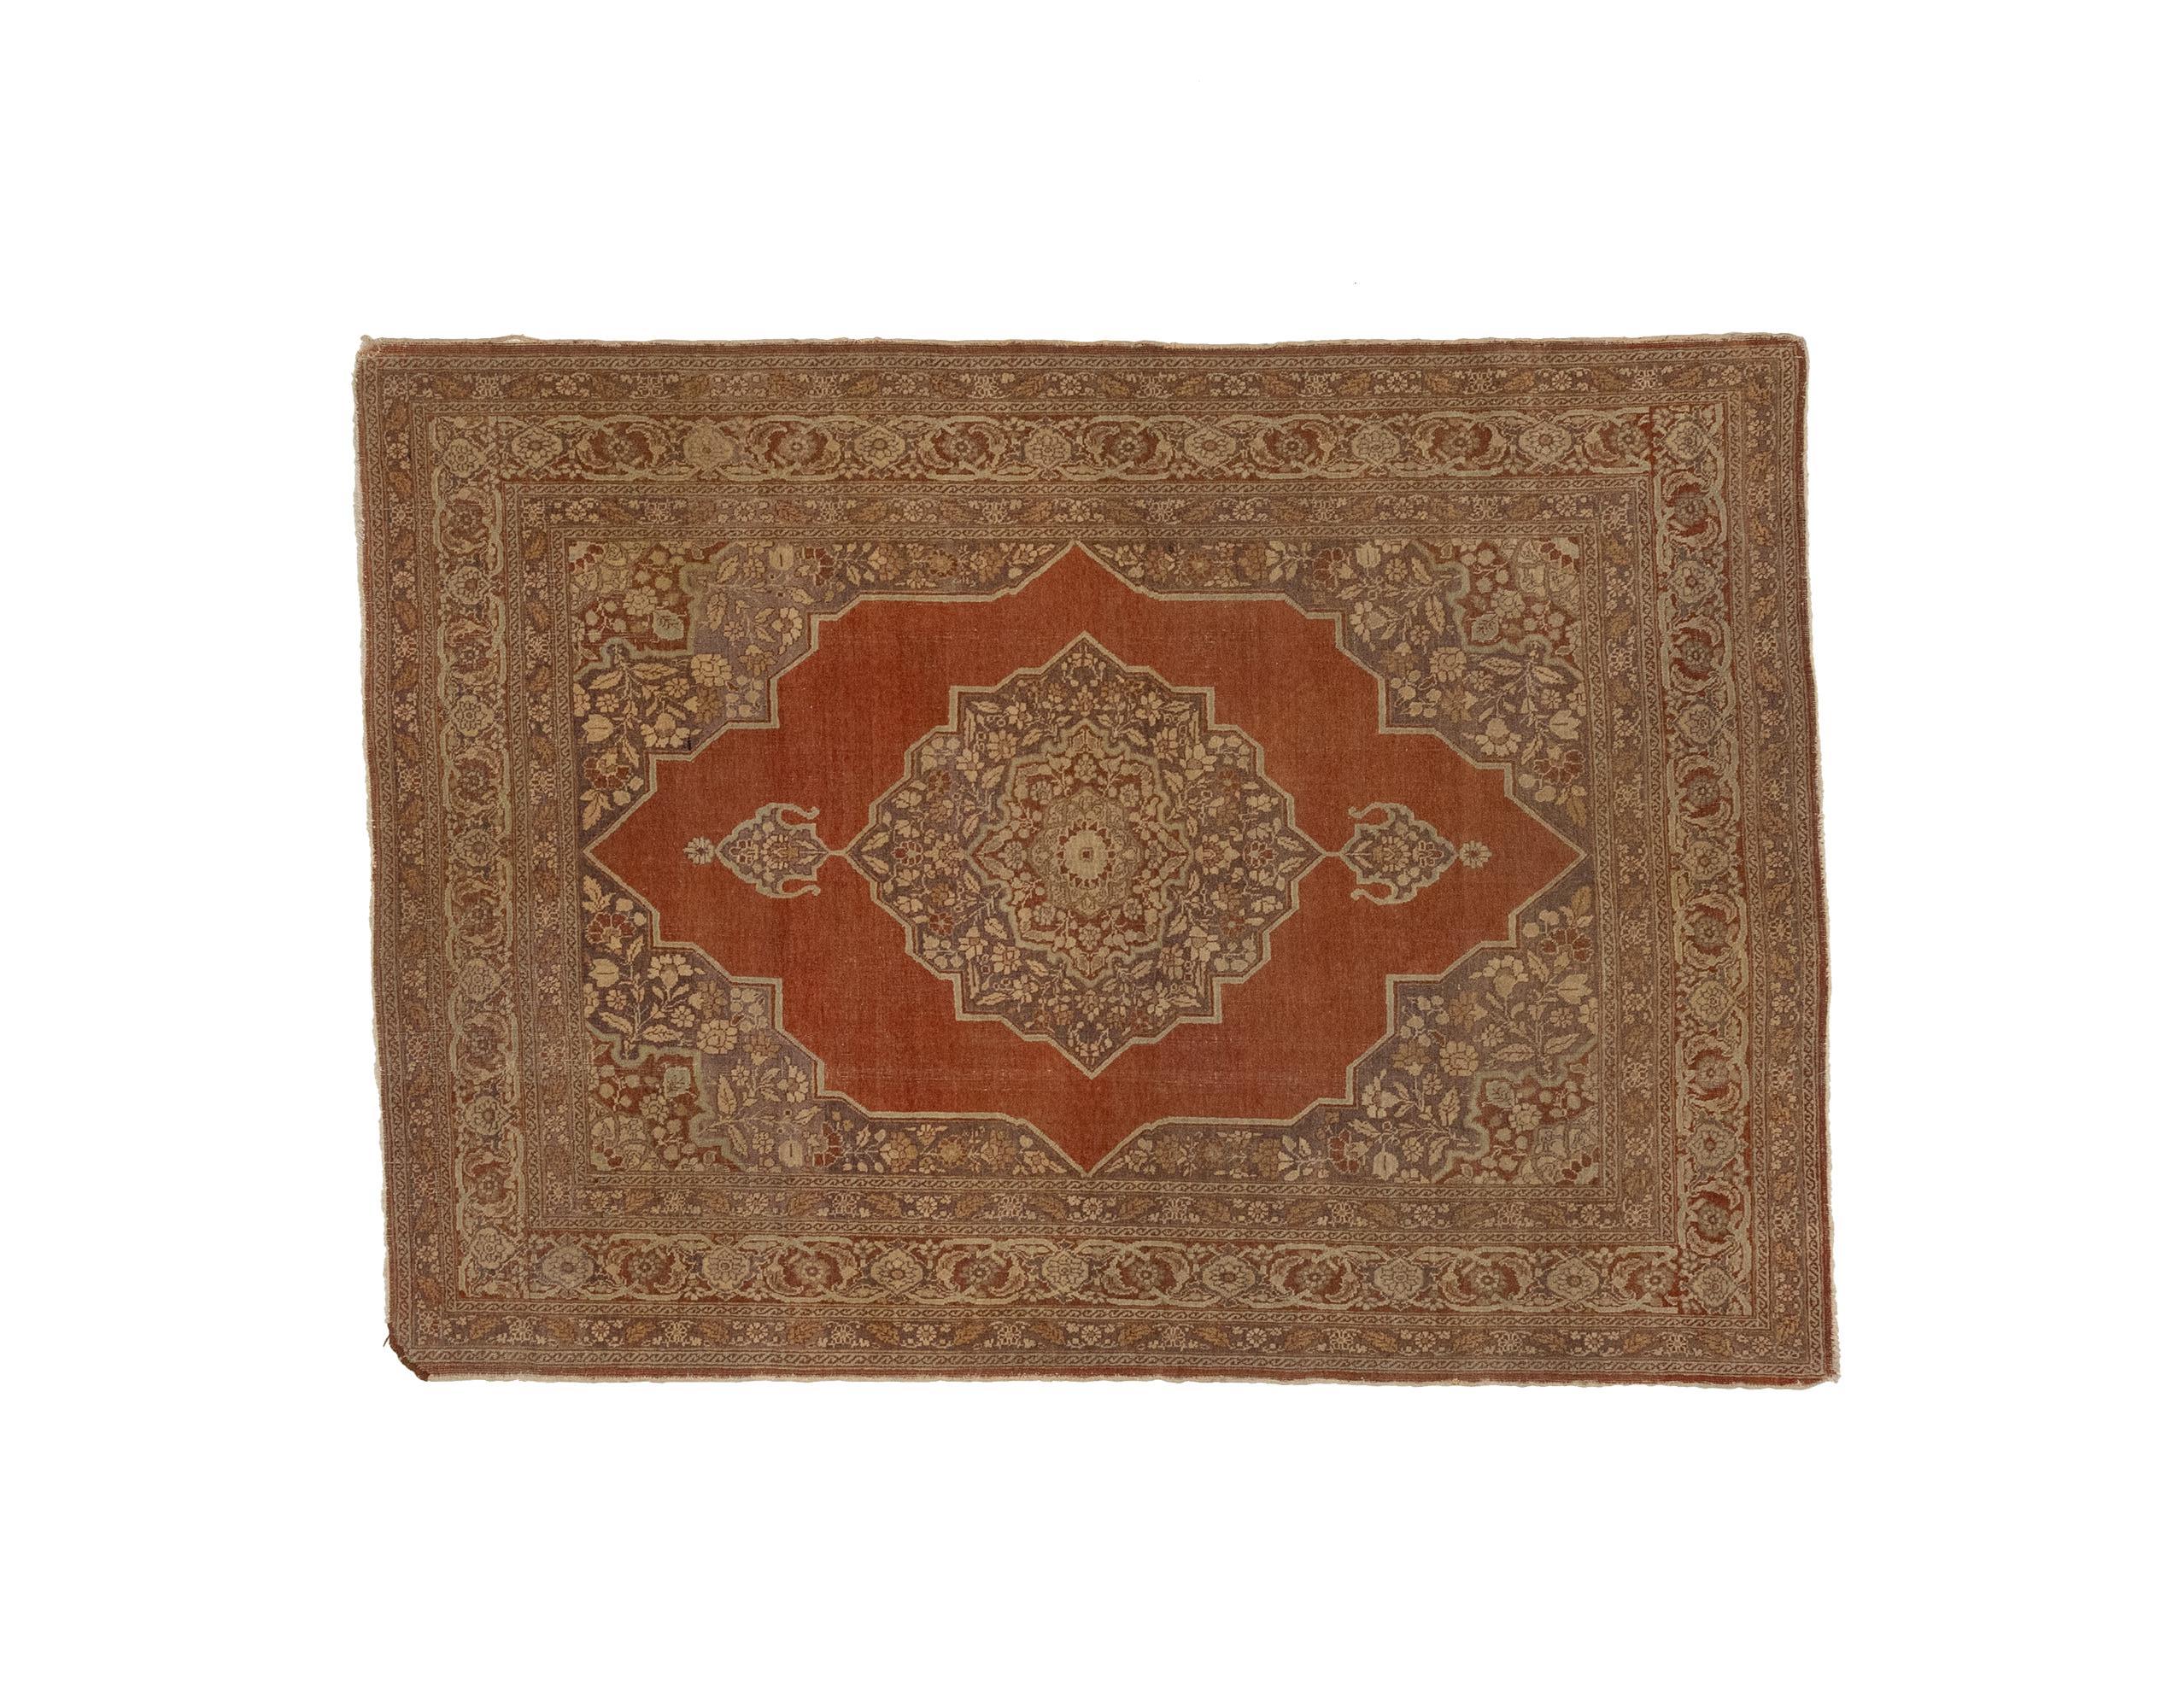 The antique medallion rug is a stunning piece of craftsmanship that dates back to the 1880s. It is a handwoven rug, which adds to its authenticity and charm. The rug features a captivating medallion design that serves as the centerpiece, showcasing